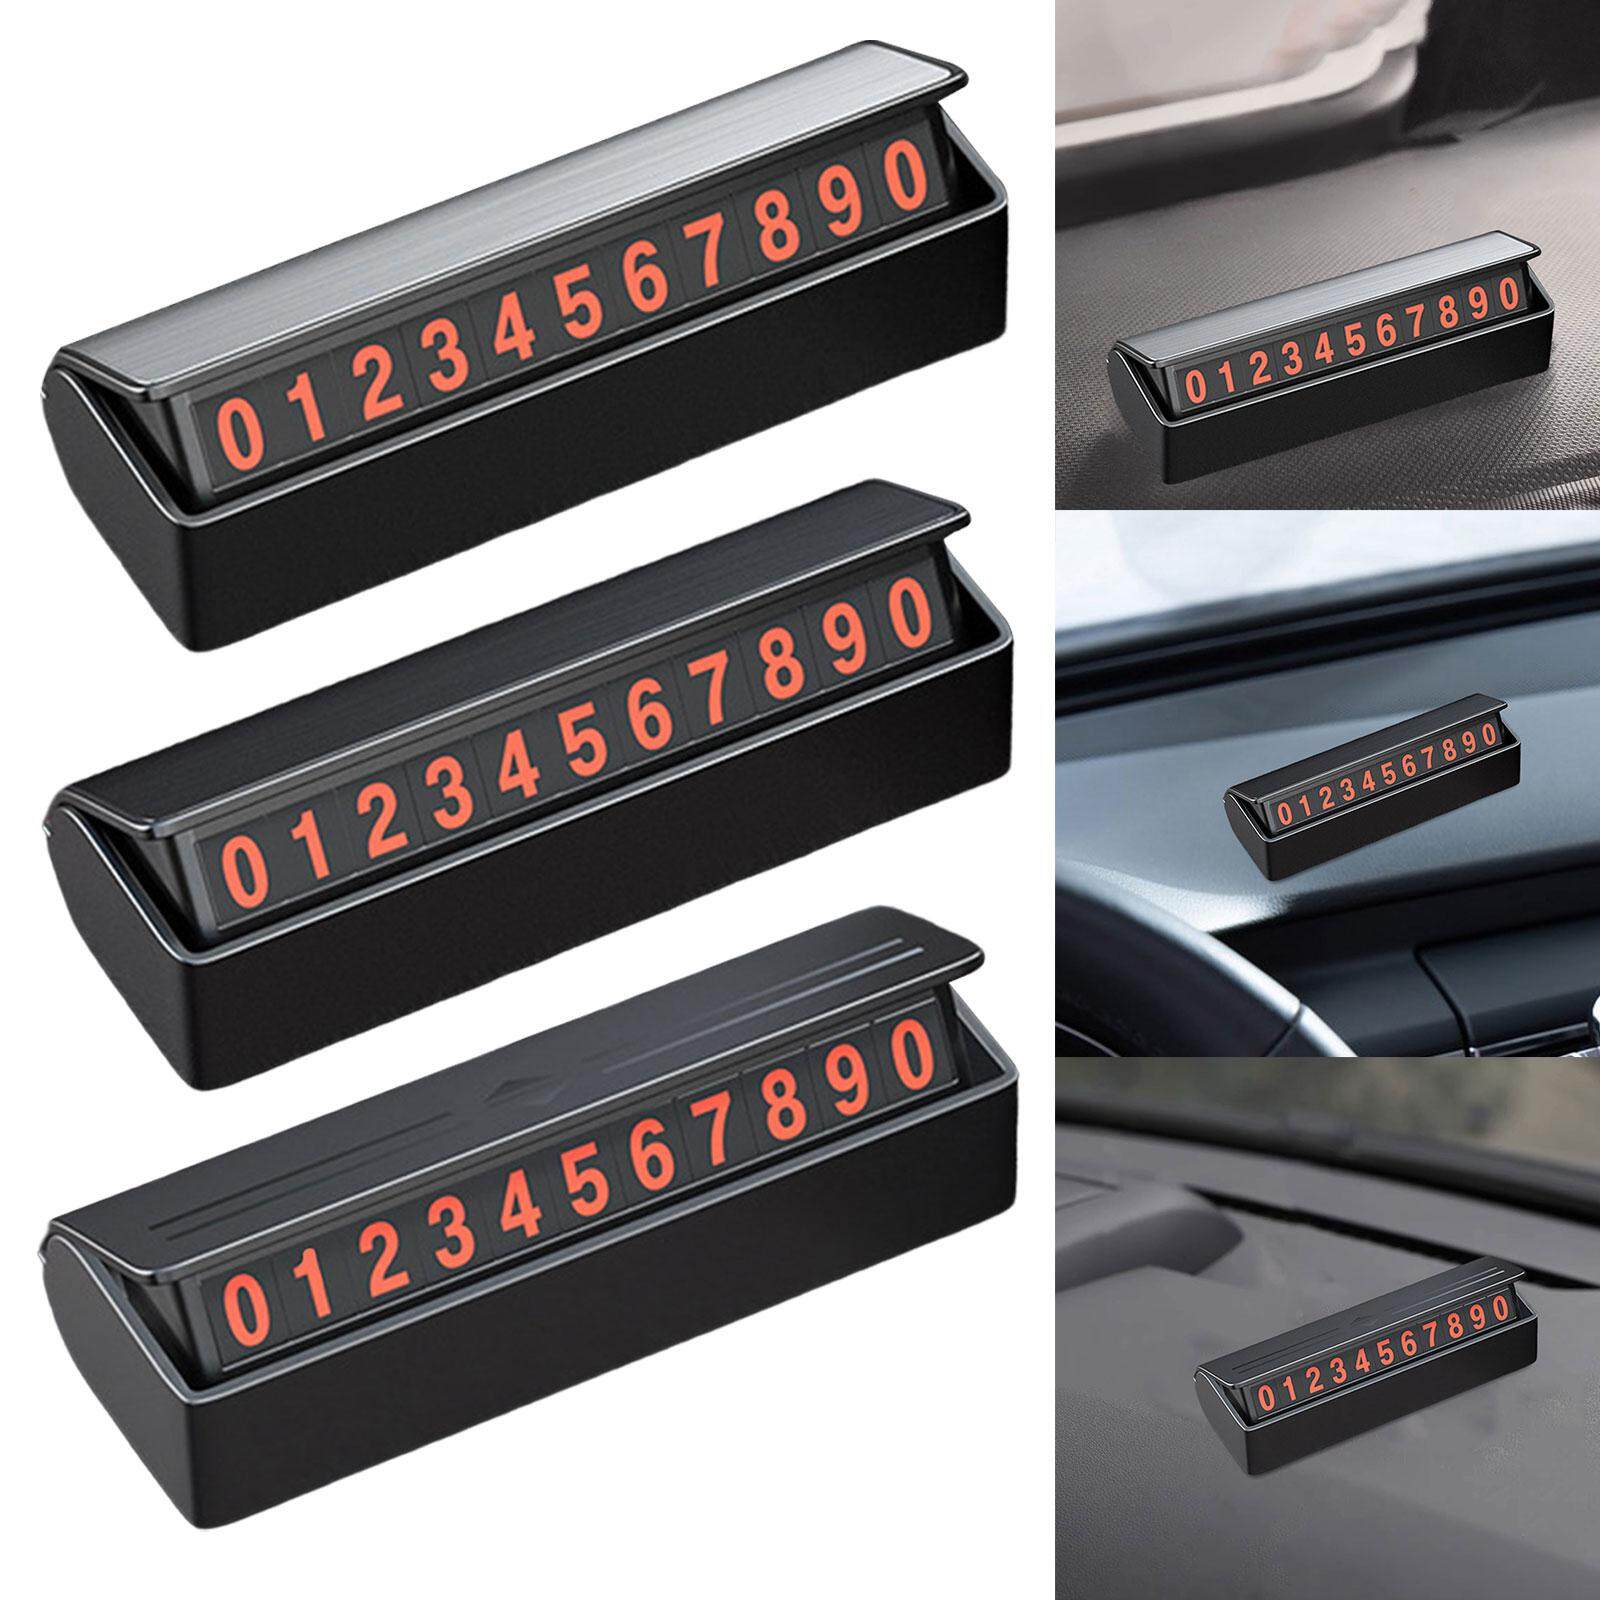 Car Phone Number Plate Luminous Auto Decorations Compact Stop Sign Temporary Parking Number Plate Notification Phone Number Card